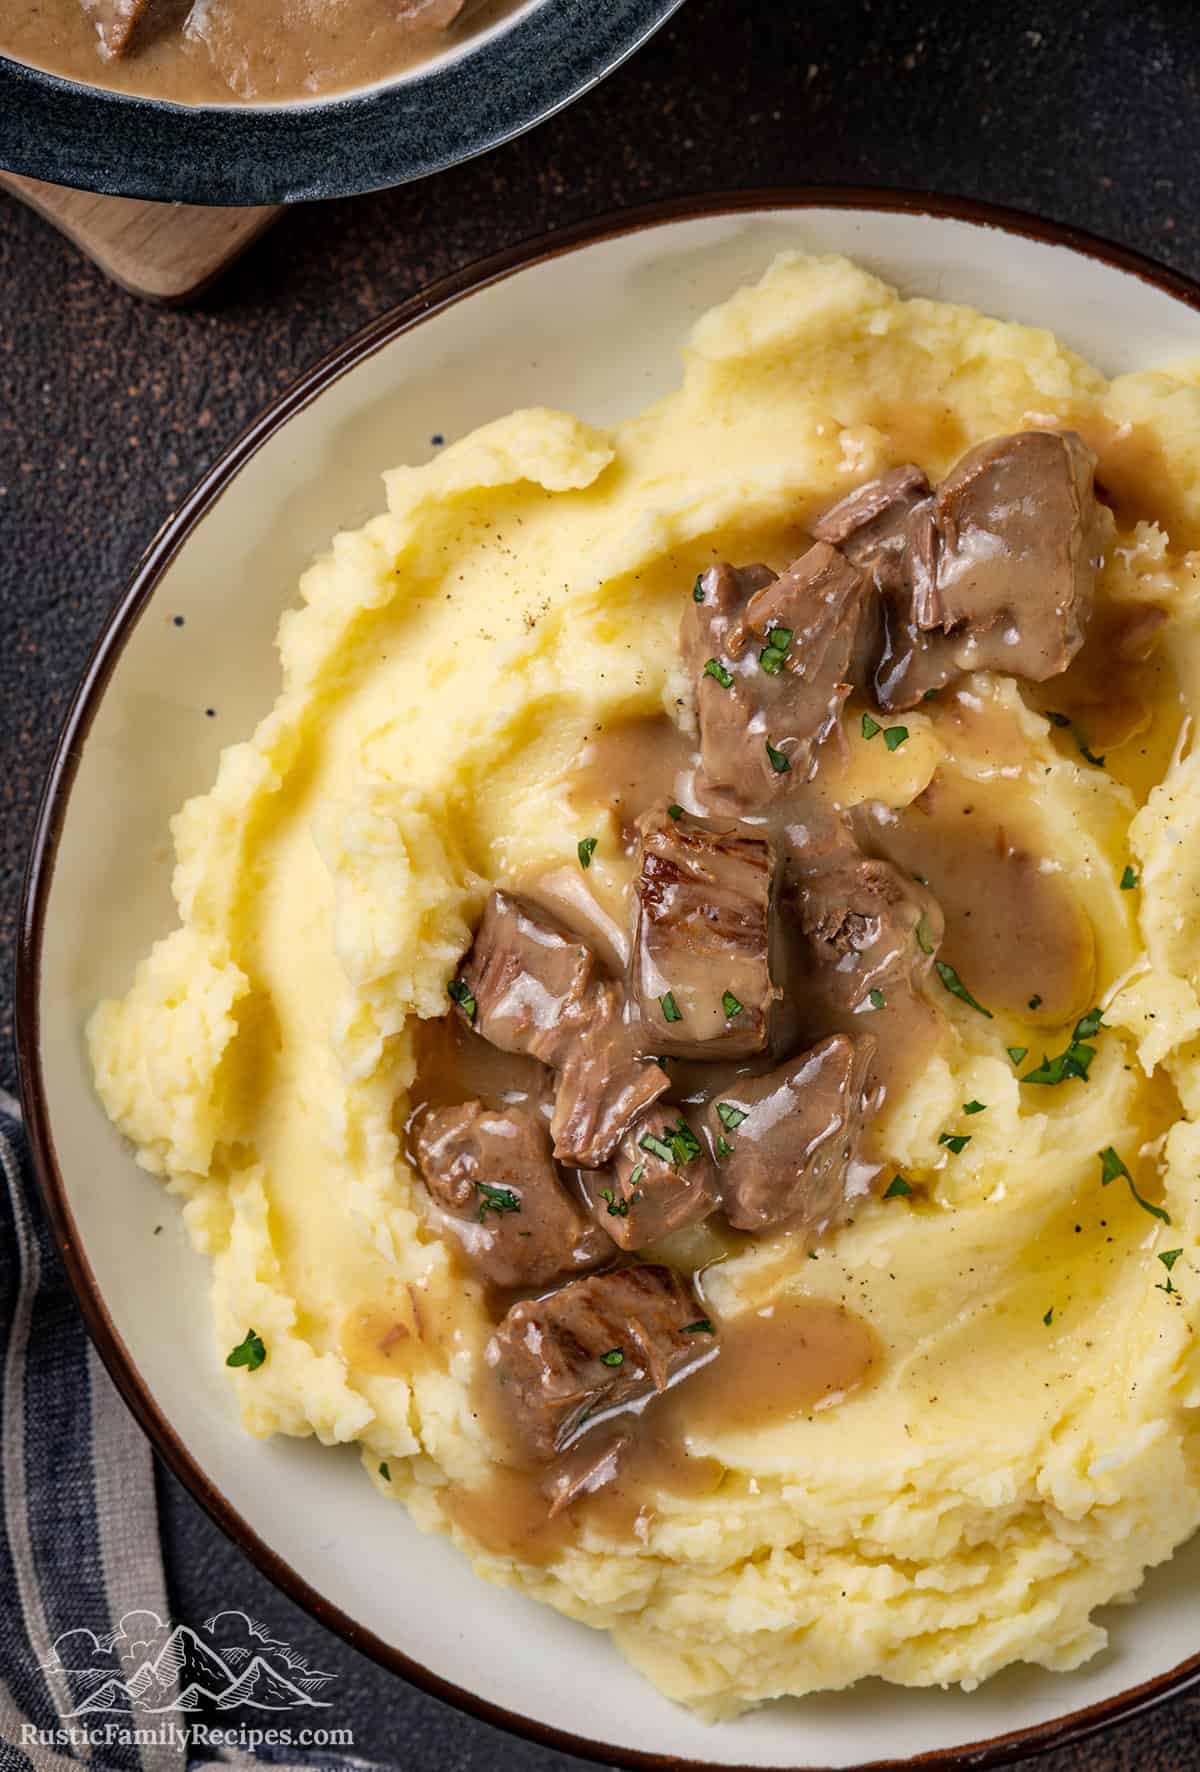 No Peek Beef Tips served on buttermilk mashed potatoes